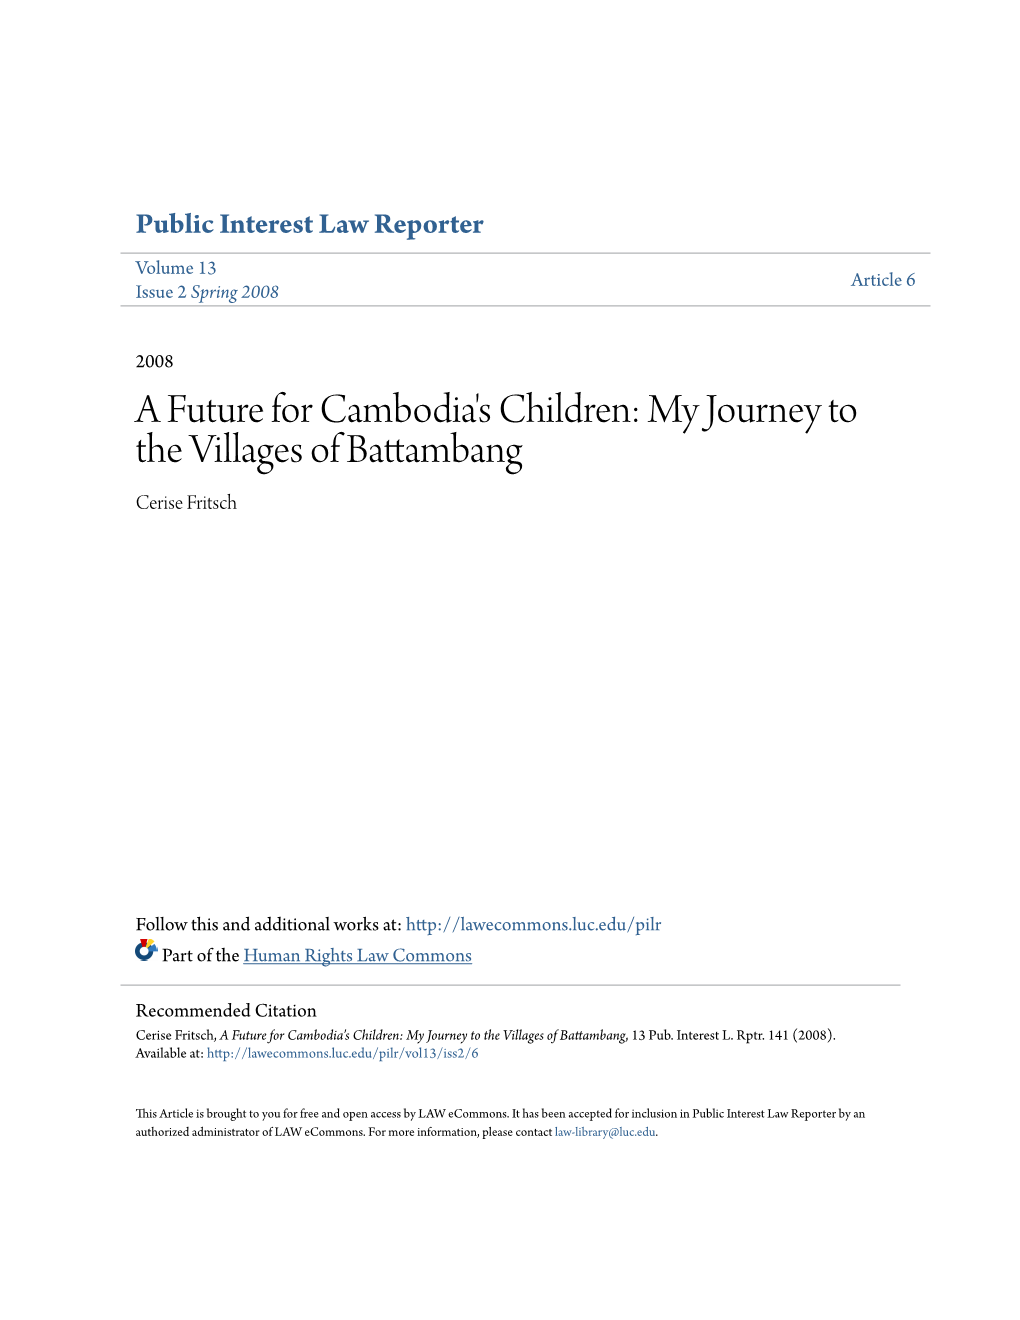 A Future for Cambodia's Children: My Journey to the Villages of Battambang Cerise Fritsch